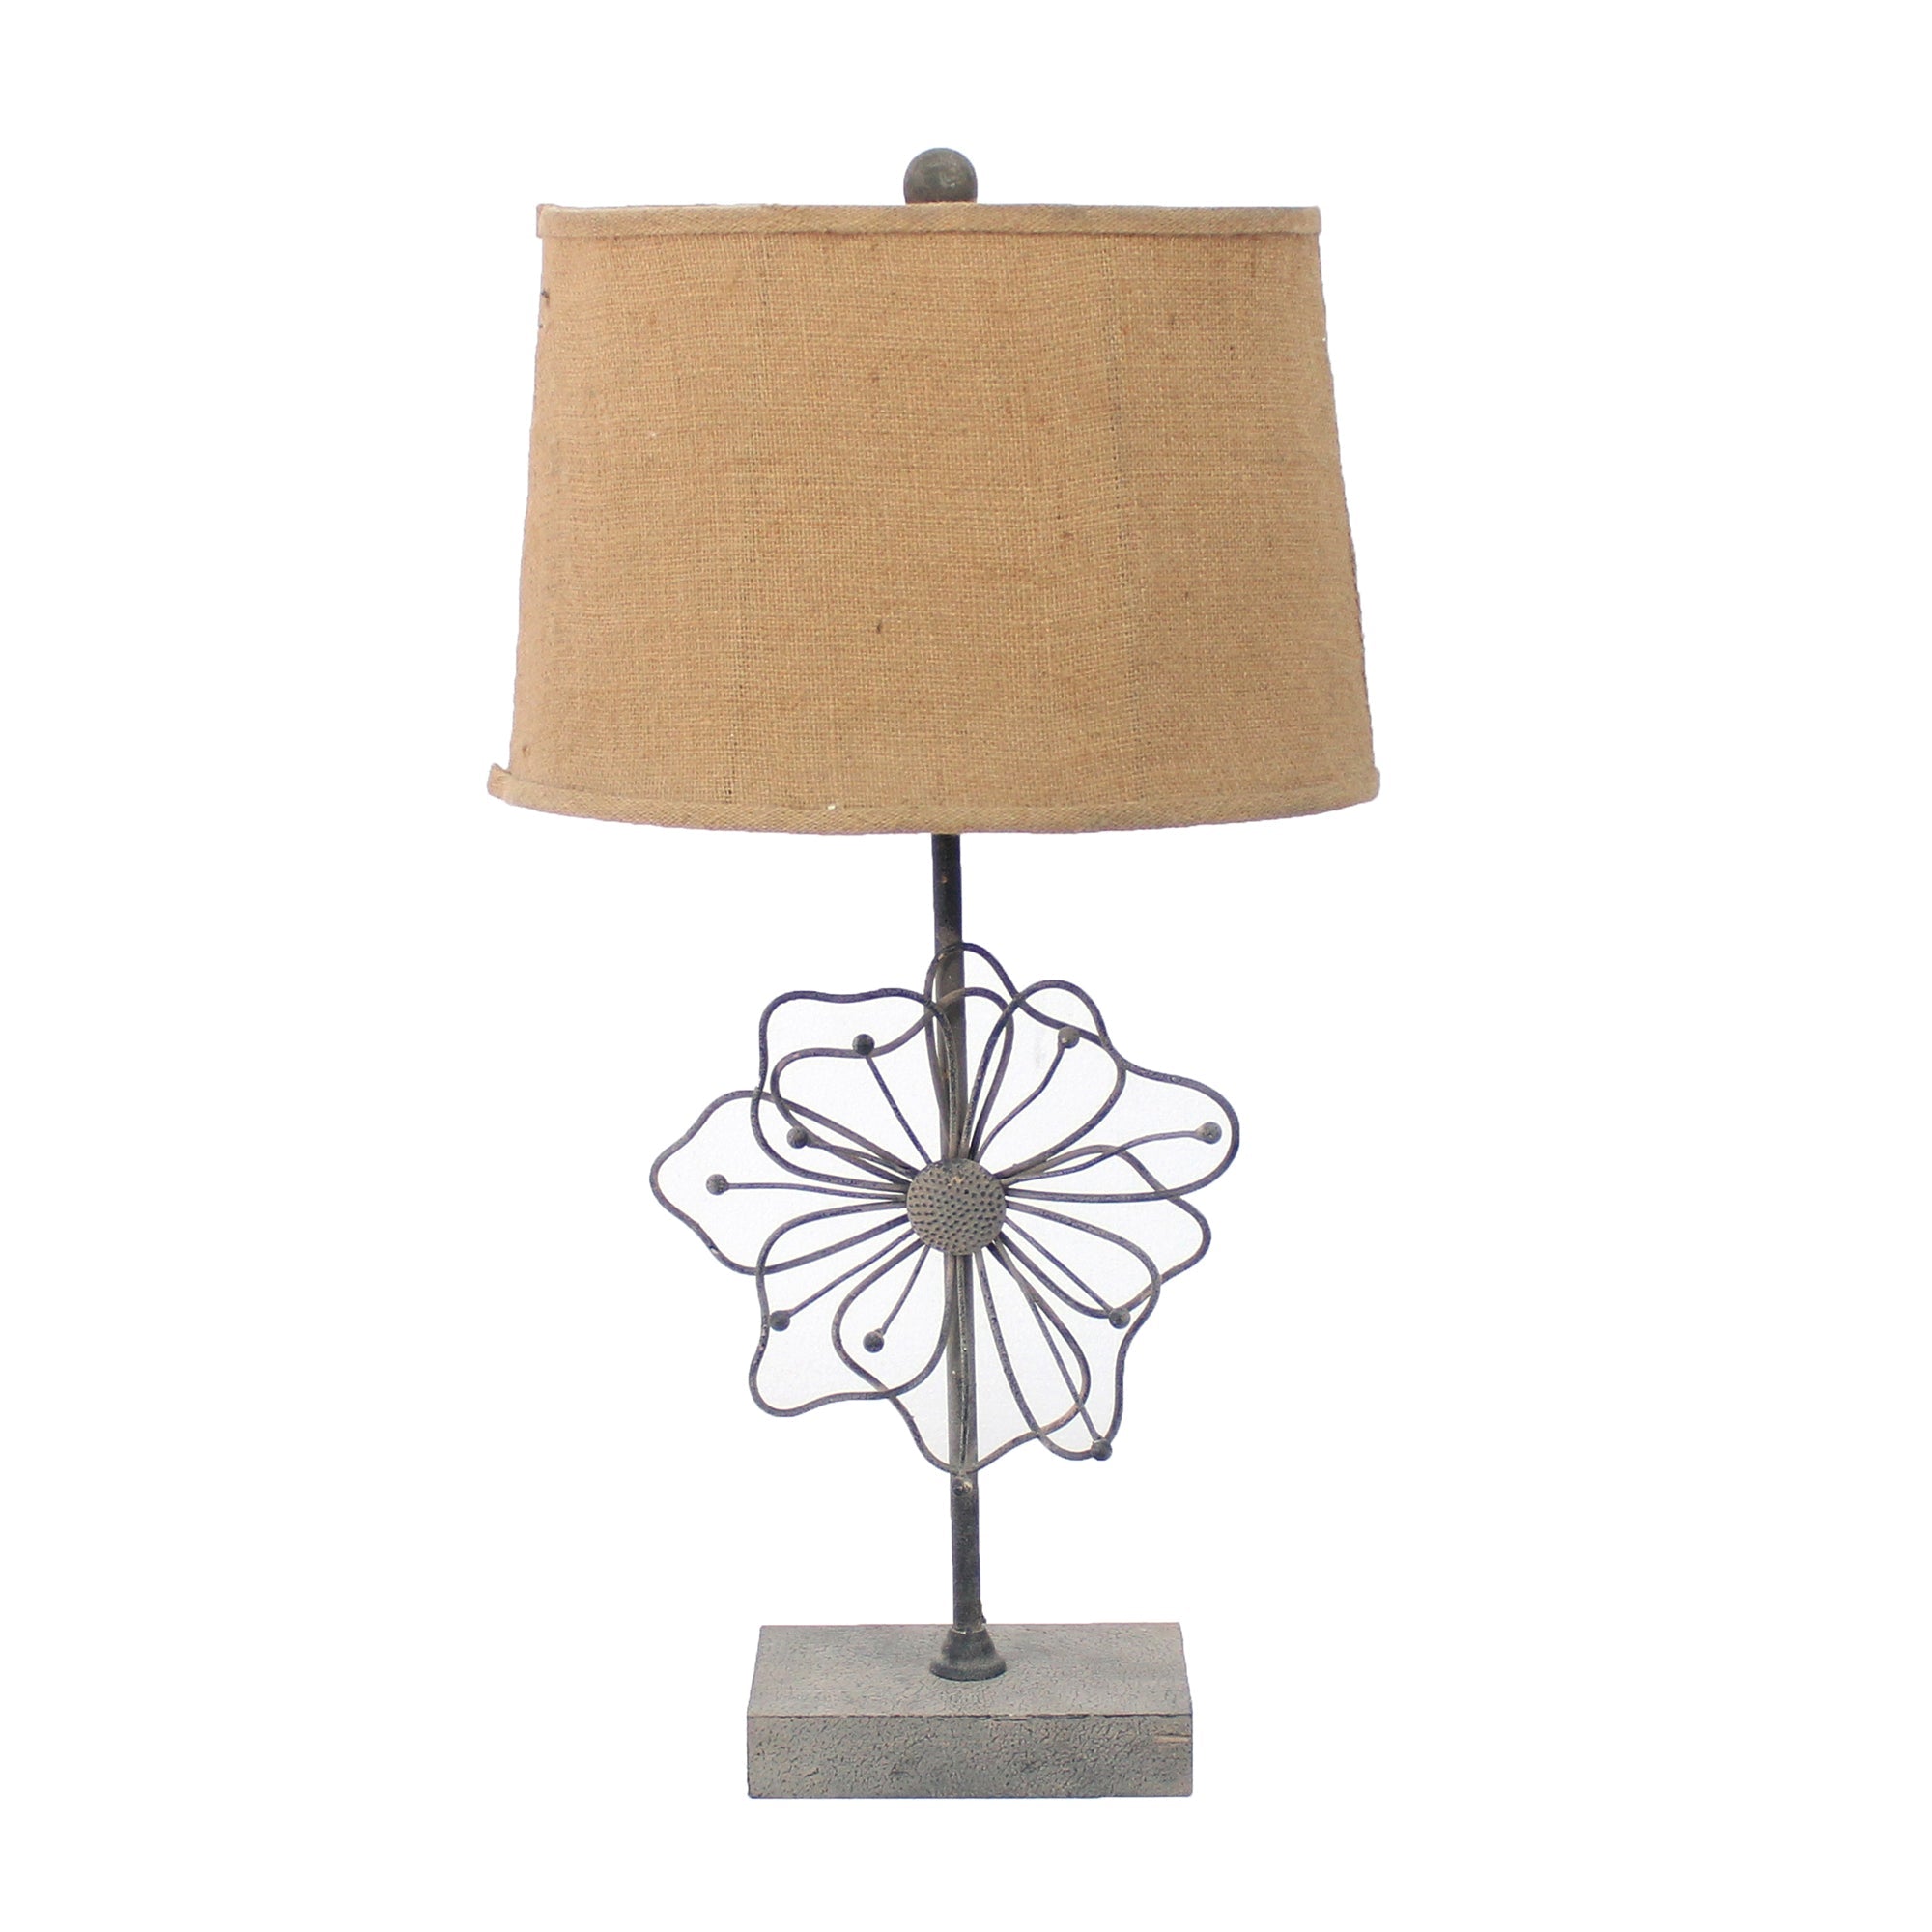 11-X-15-X-27.75-Tan-Country-Cottage-With-Blooming-Flower-Pedestal-Table-Lamp-Table-Lamps